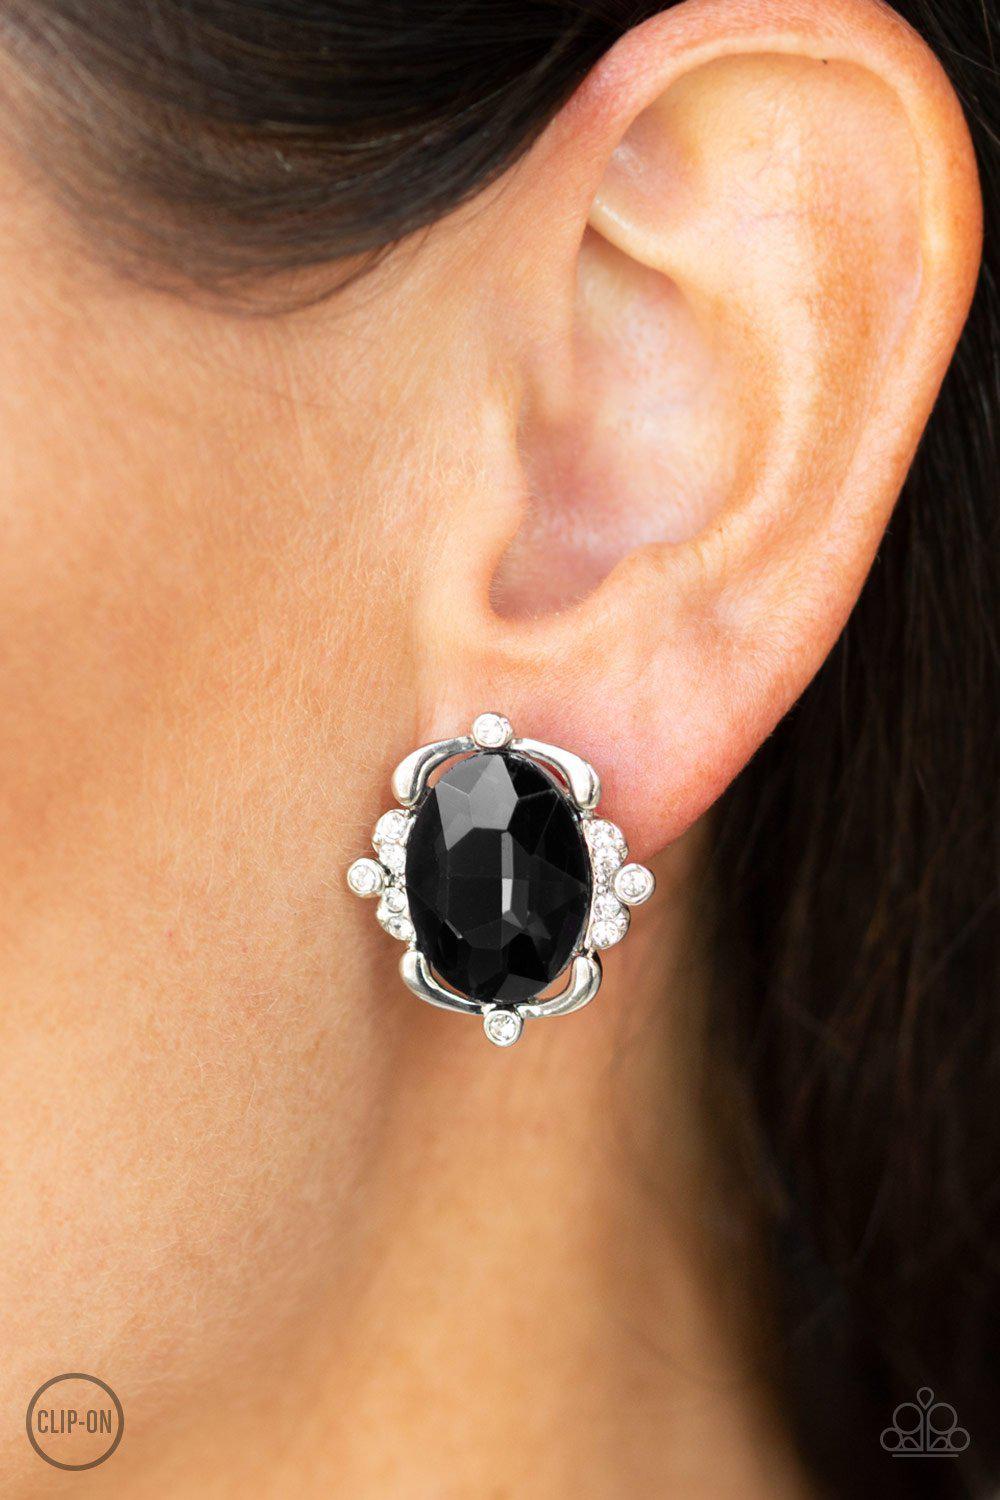 Regally Radiant Black Clip On Earrings - Paparazzi Accessories - model -CarasShop.com - $5 Jewelry by Cara Jewels